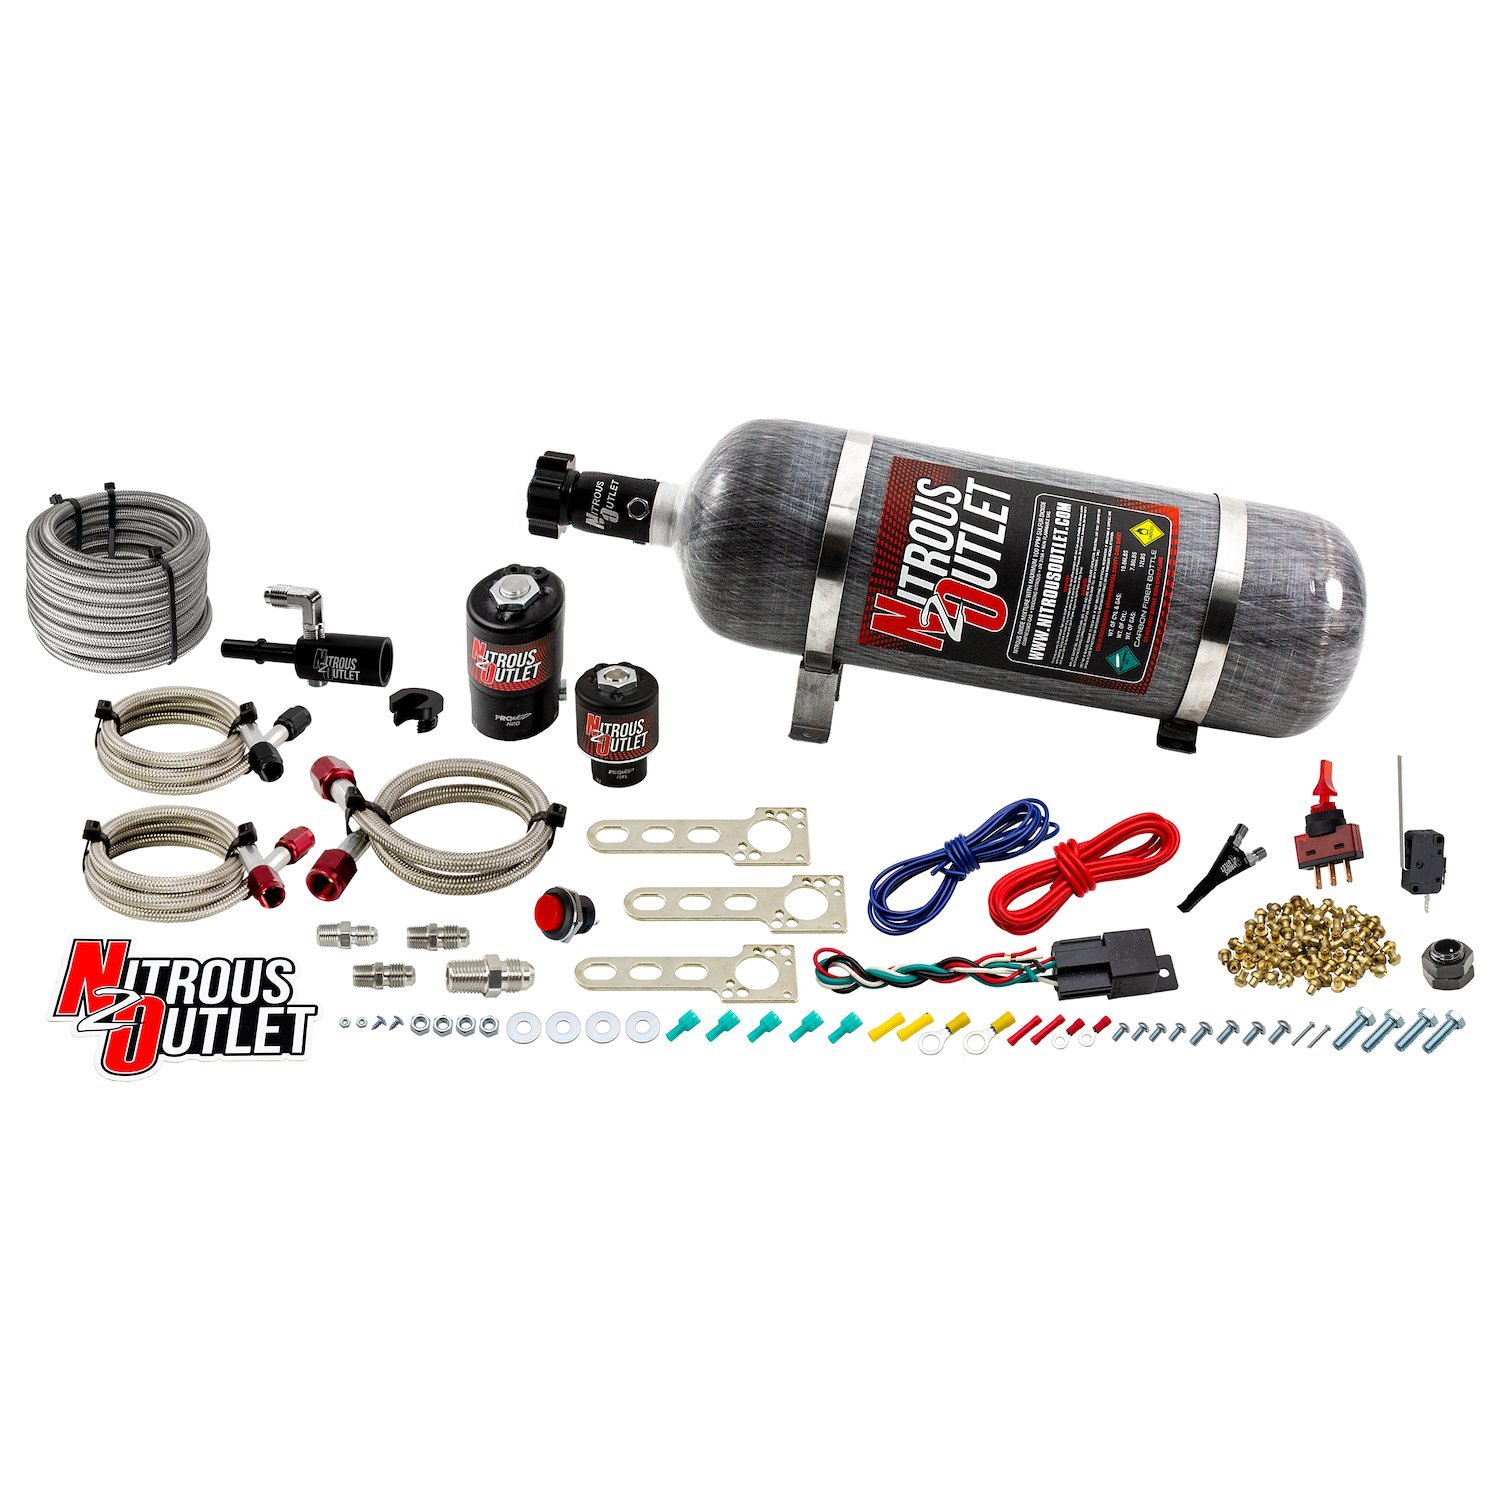 00-10016-12 EFI Single-Nozzle System, 2011-2015 Ford Mustang 5.0/F-150, Gas/E85, 5-55psi, 35-200HP, 12lb Bottle